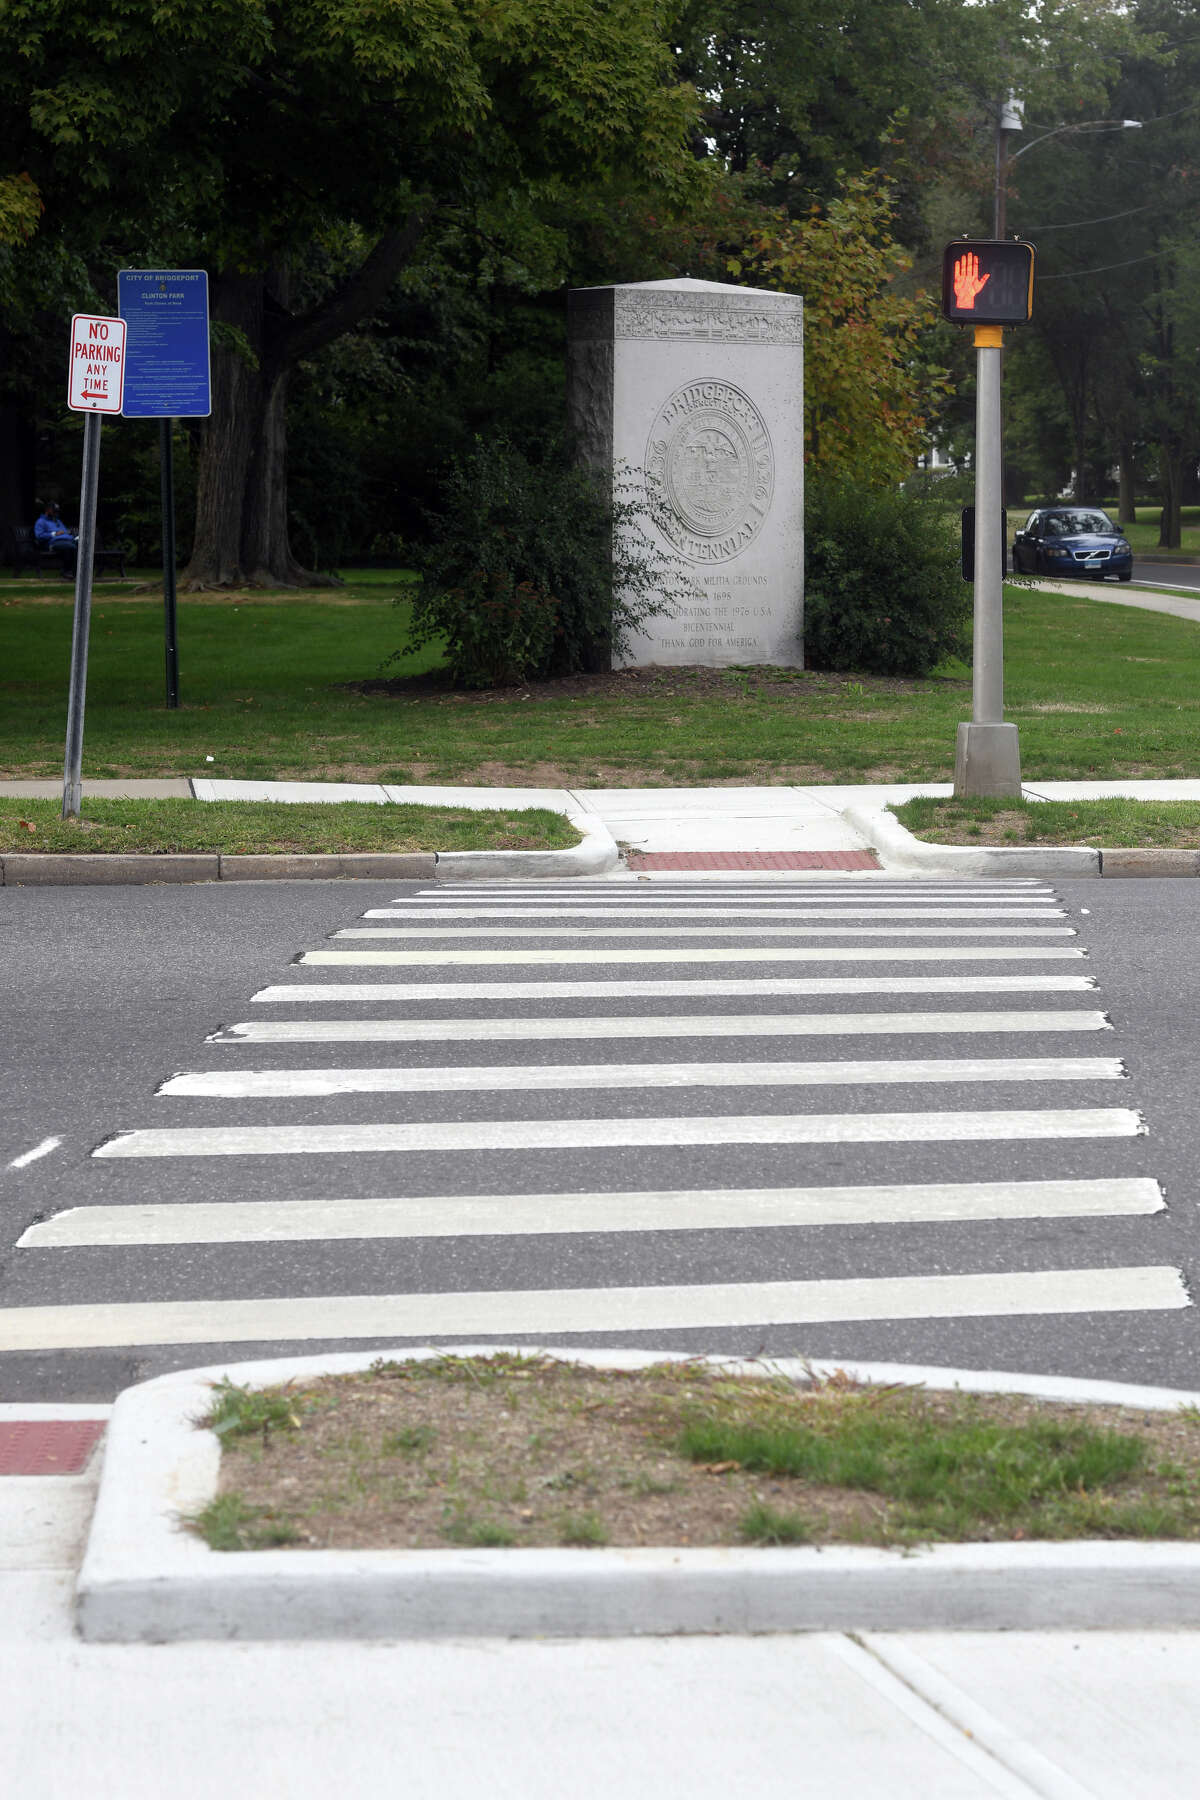 A pedestrian crosswalk on North Avenue at the intersection with Clinton Avenue, in Bridgeport, Conn. Sept. 30, 2022.